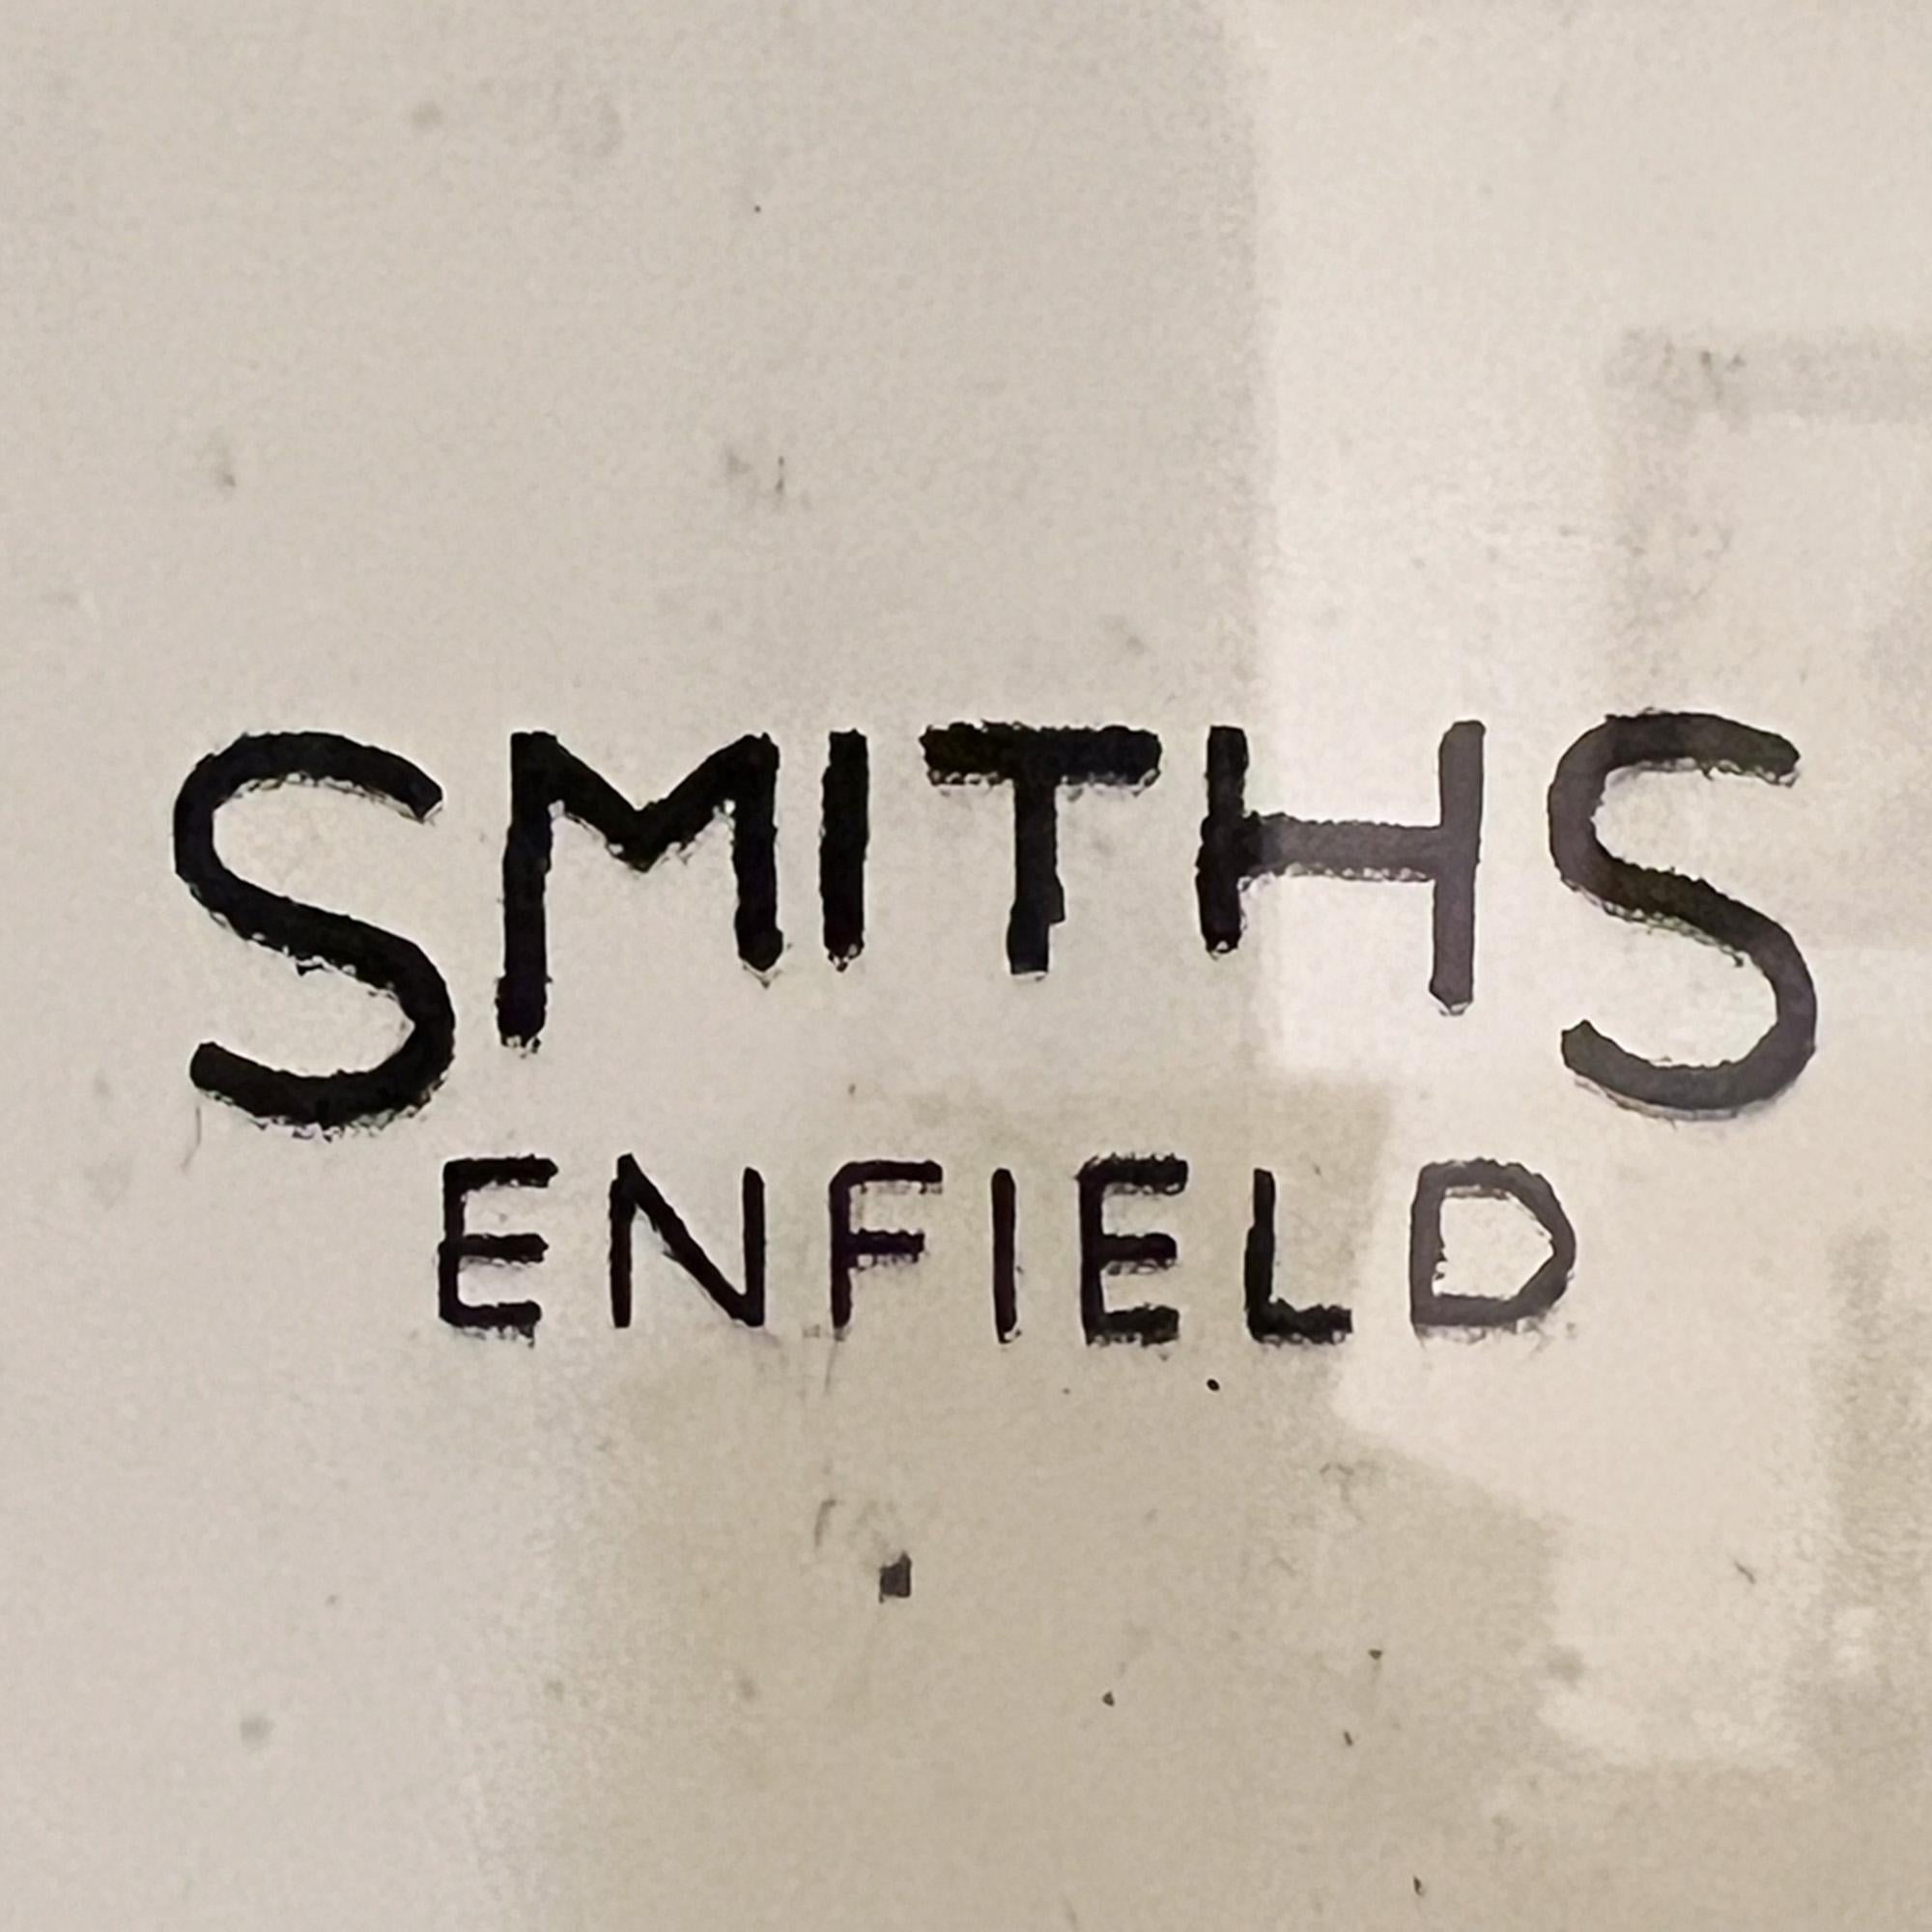 Hand-Crafted Smith's of Enfield, London Chiming Wall Clock